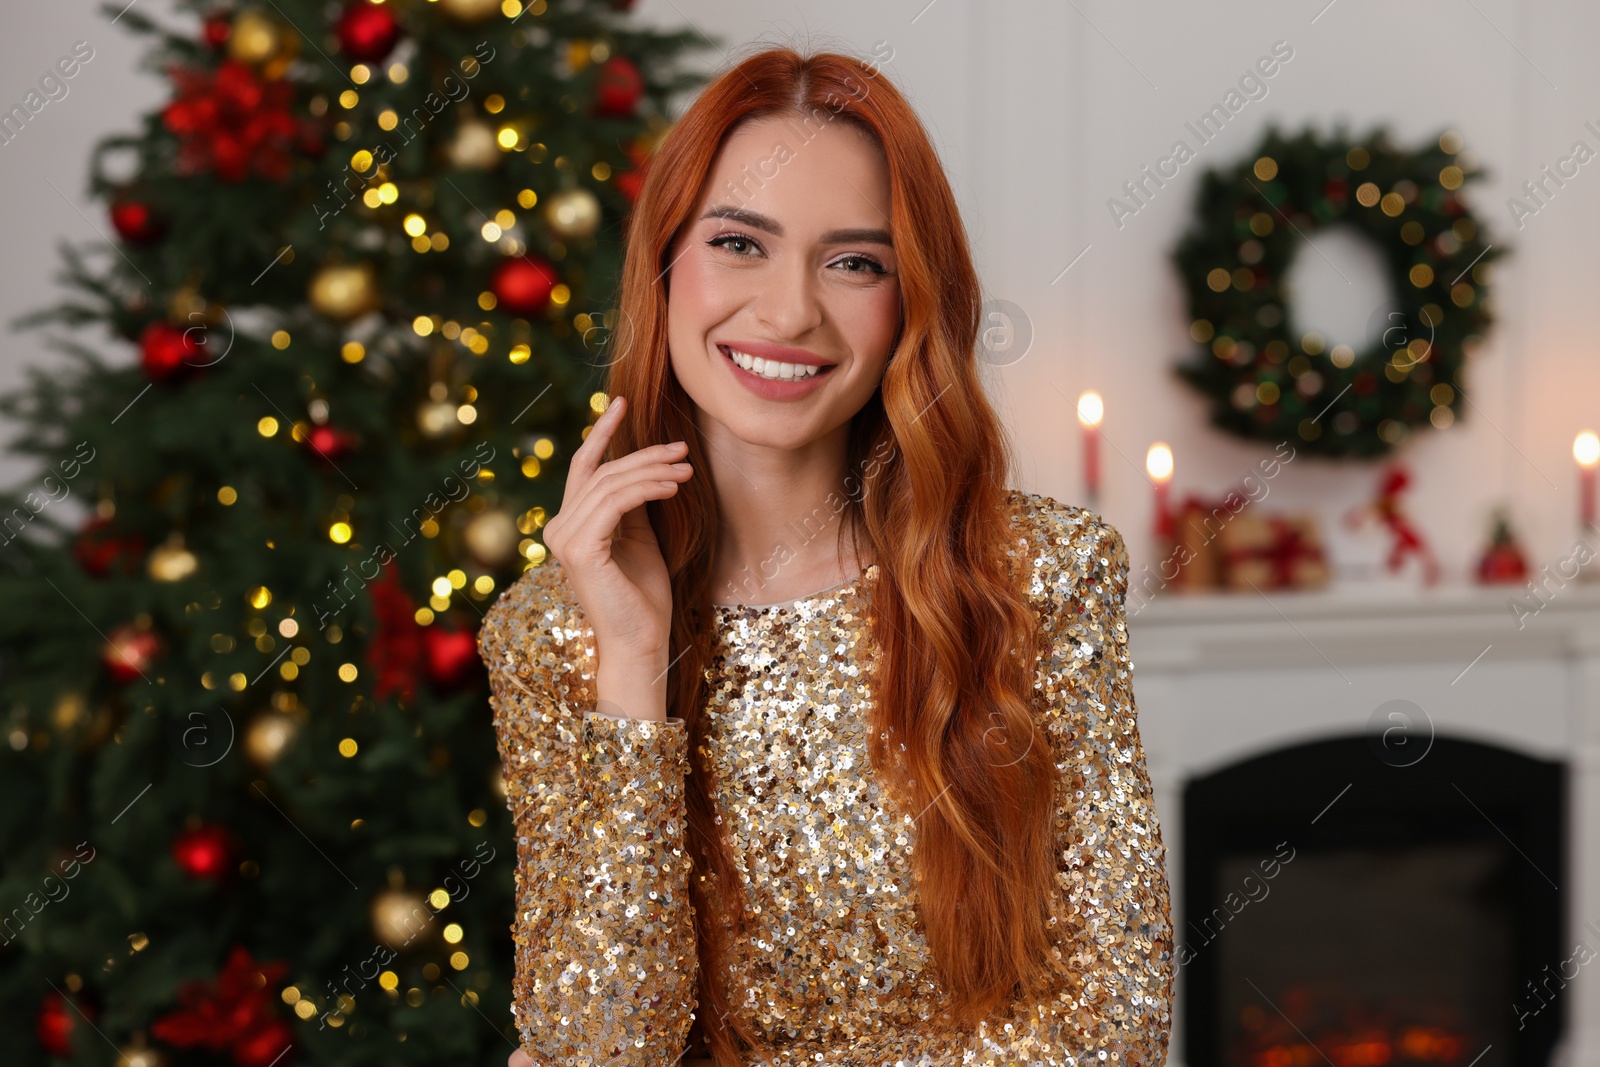 Photo of Happy young woman in room decorated for Christmas